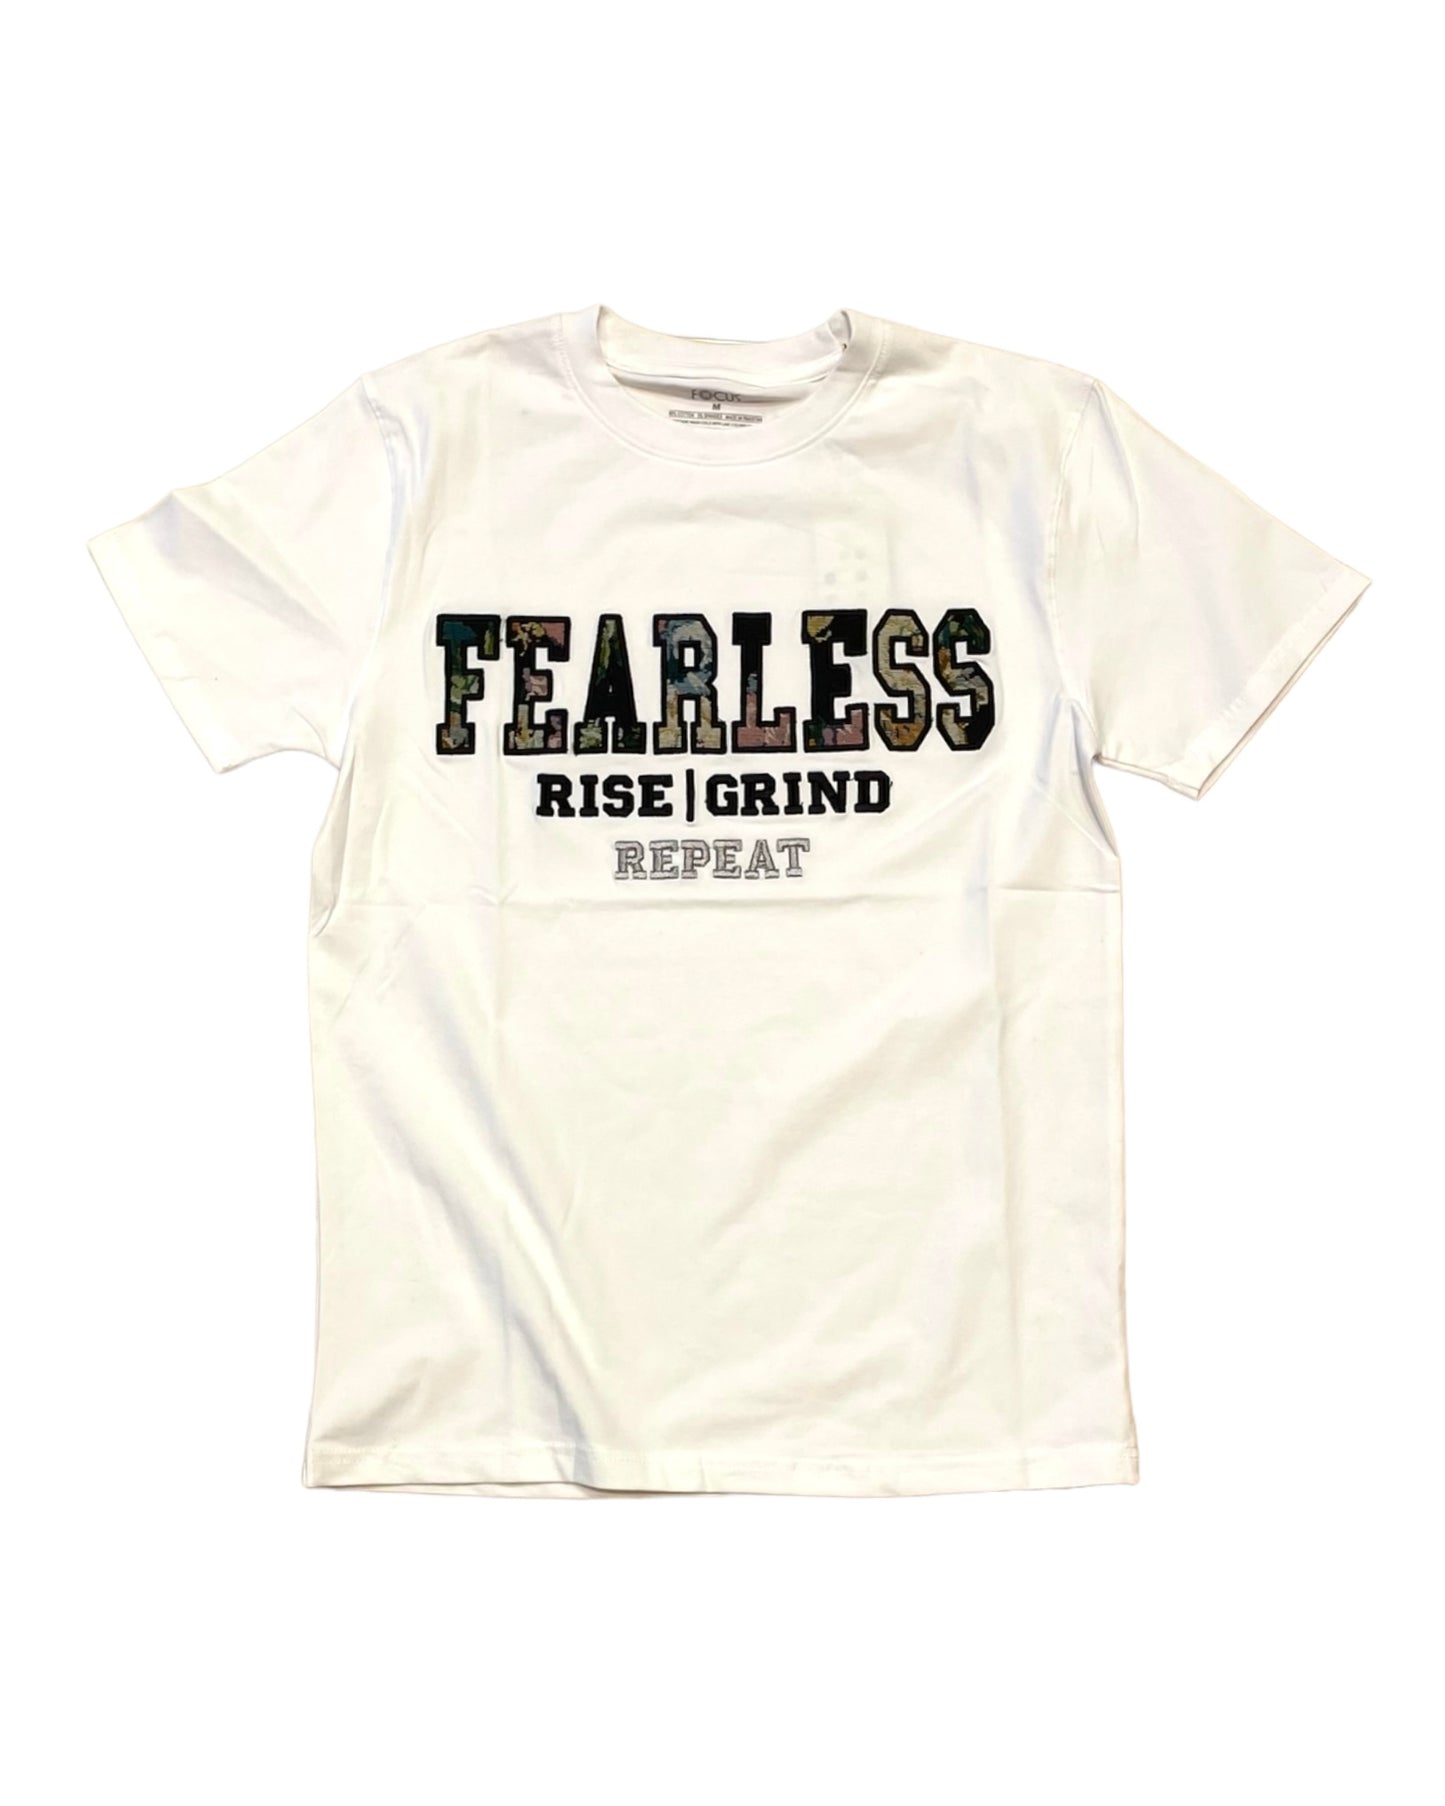 Fearless Tapestry Tee